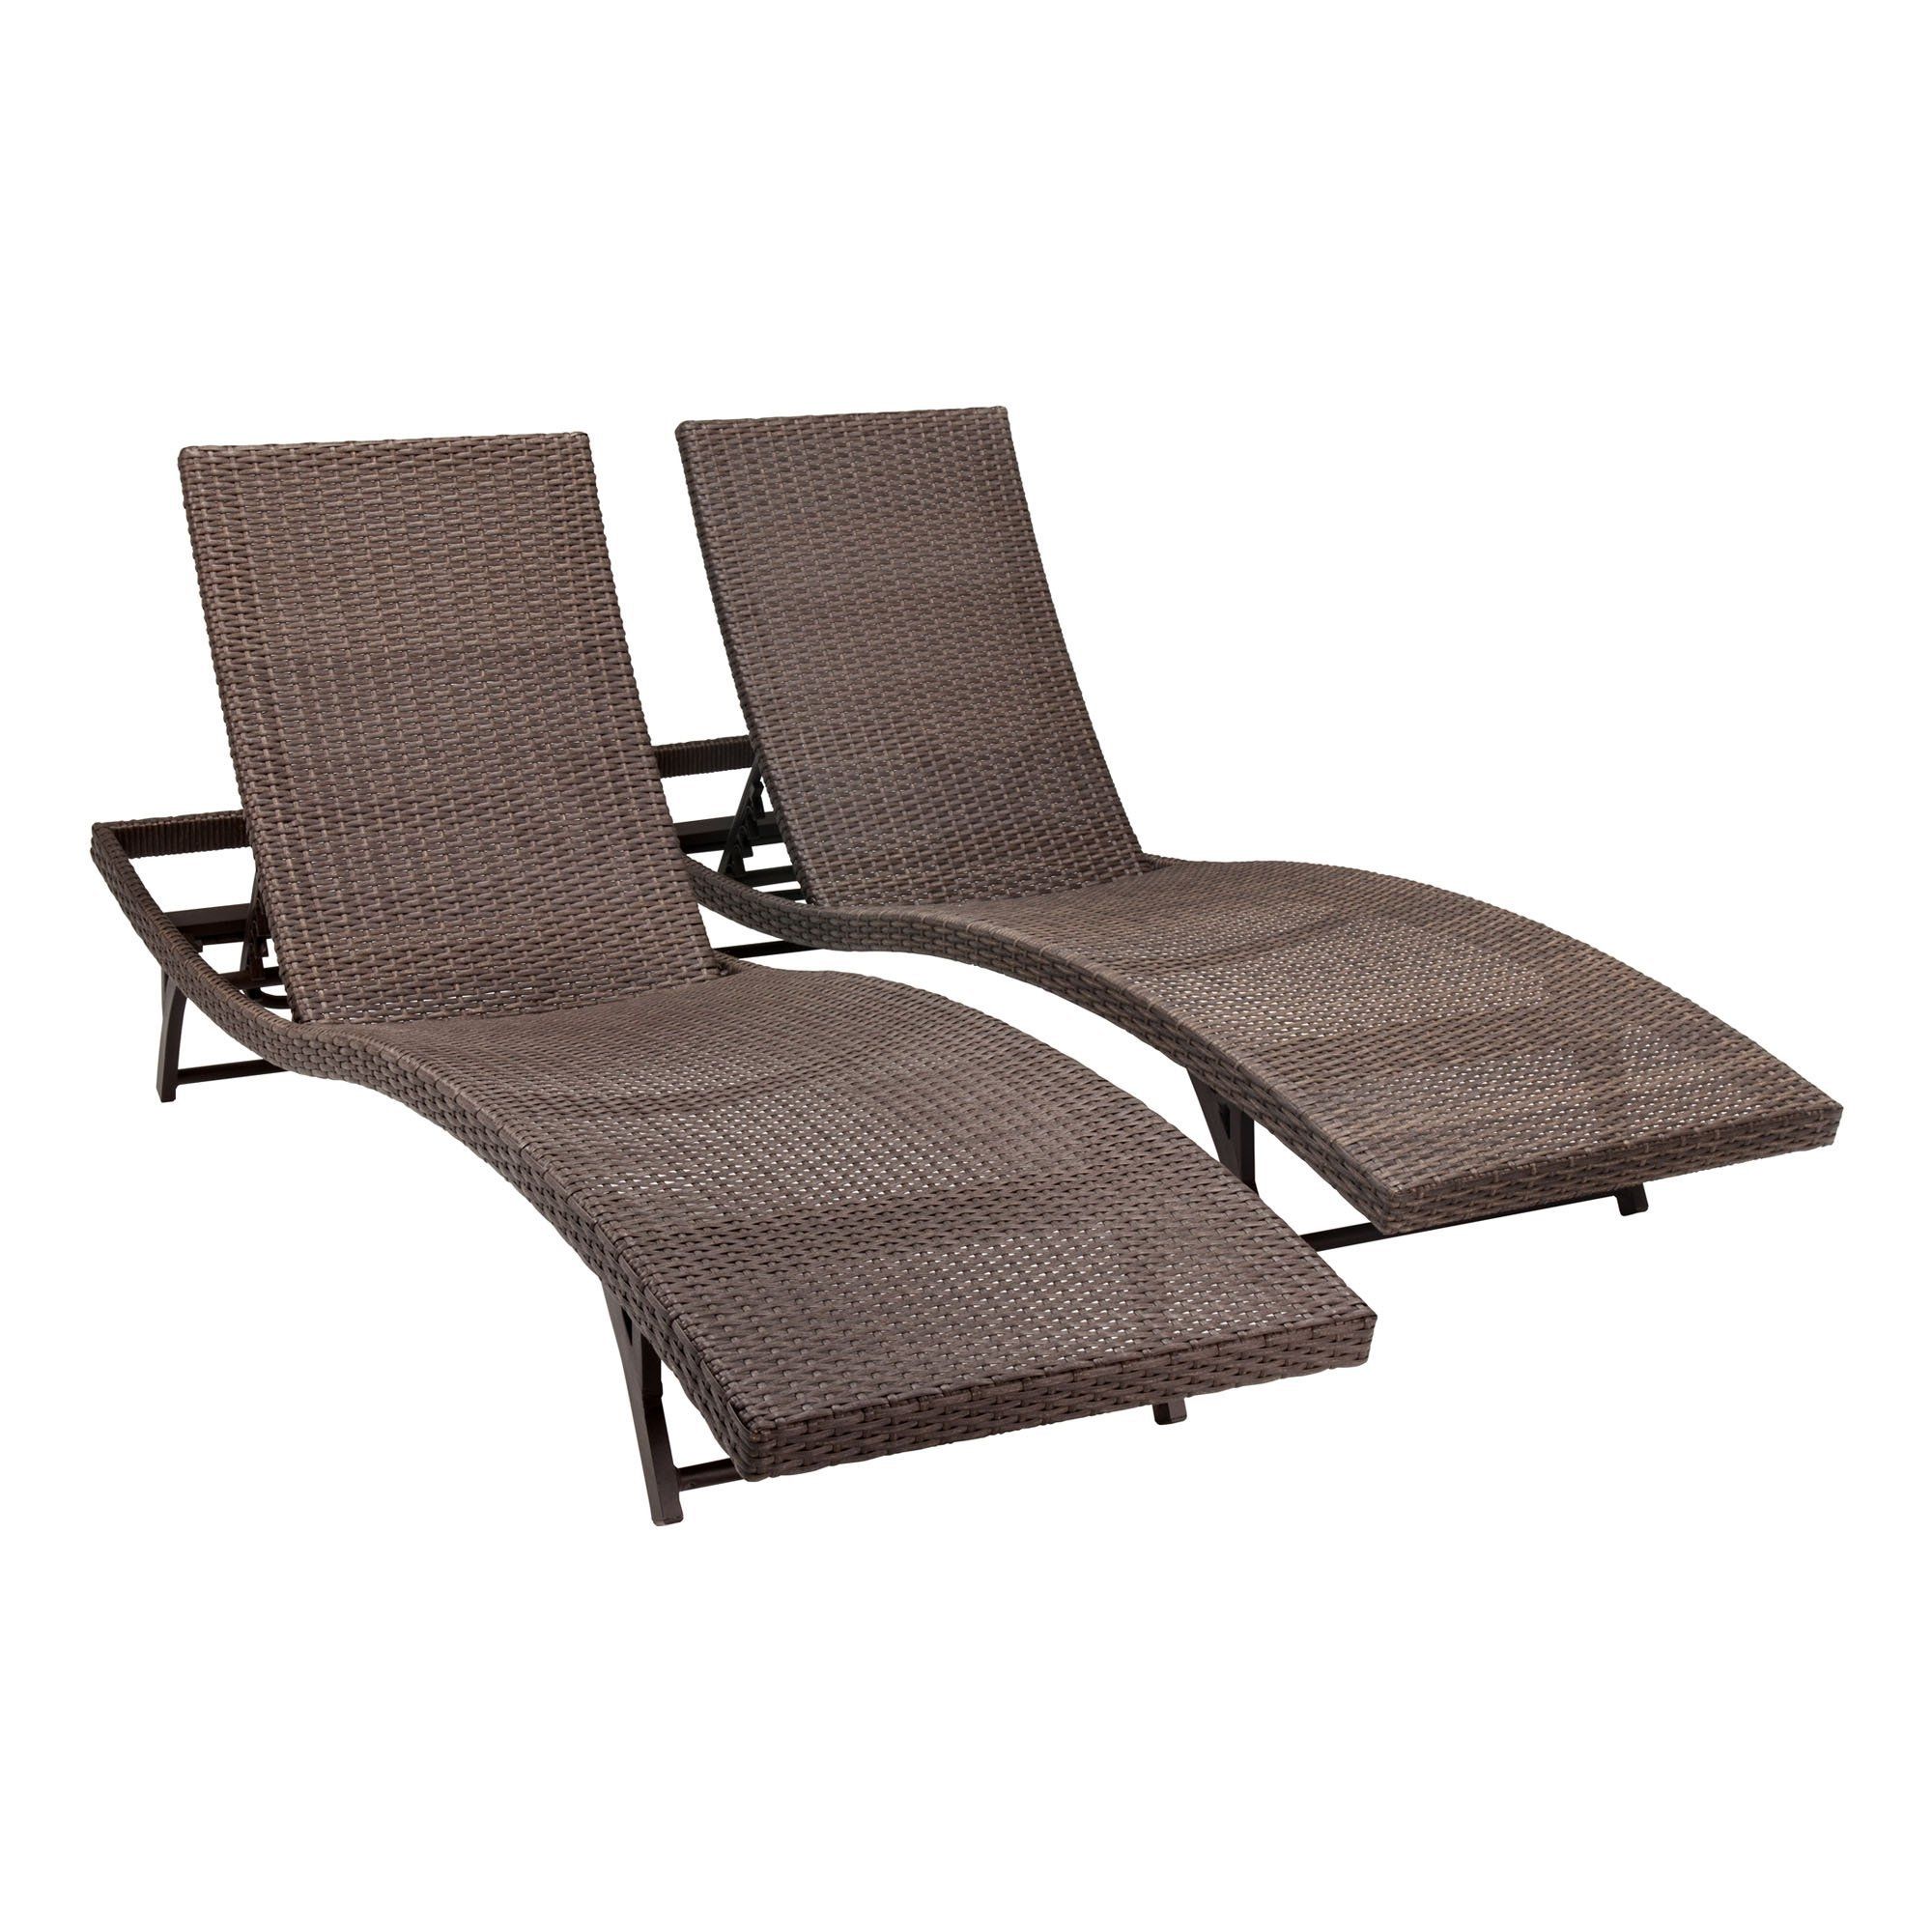 Most Recent Outdoor : Cheap Lounge Chairs Vinyl Strap Chaise Lounge Home Depot Pertaining To Vinyl Strap Chaise Lounge Chairs (View 14 of 15)